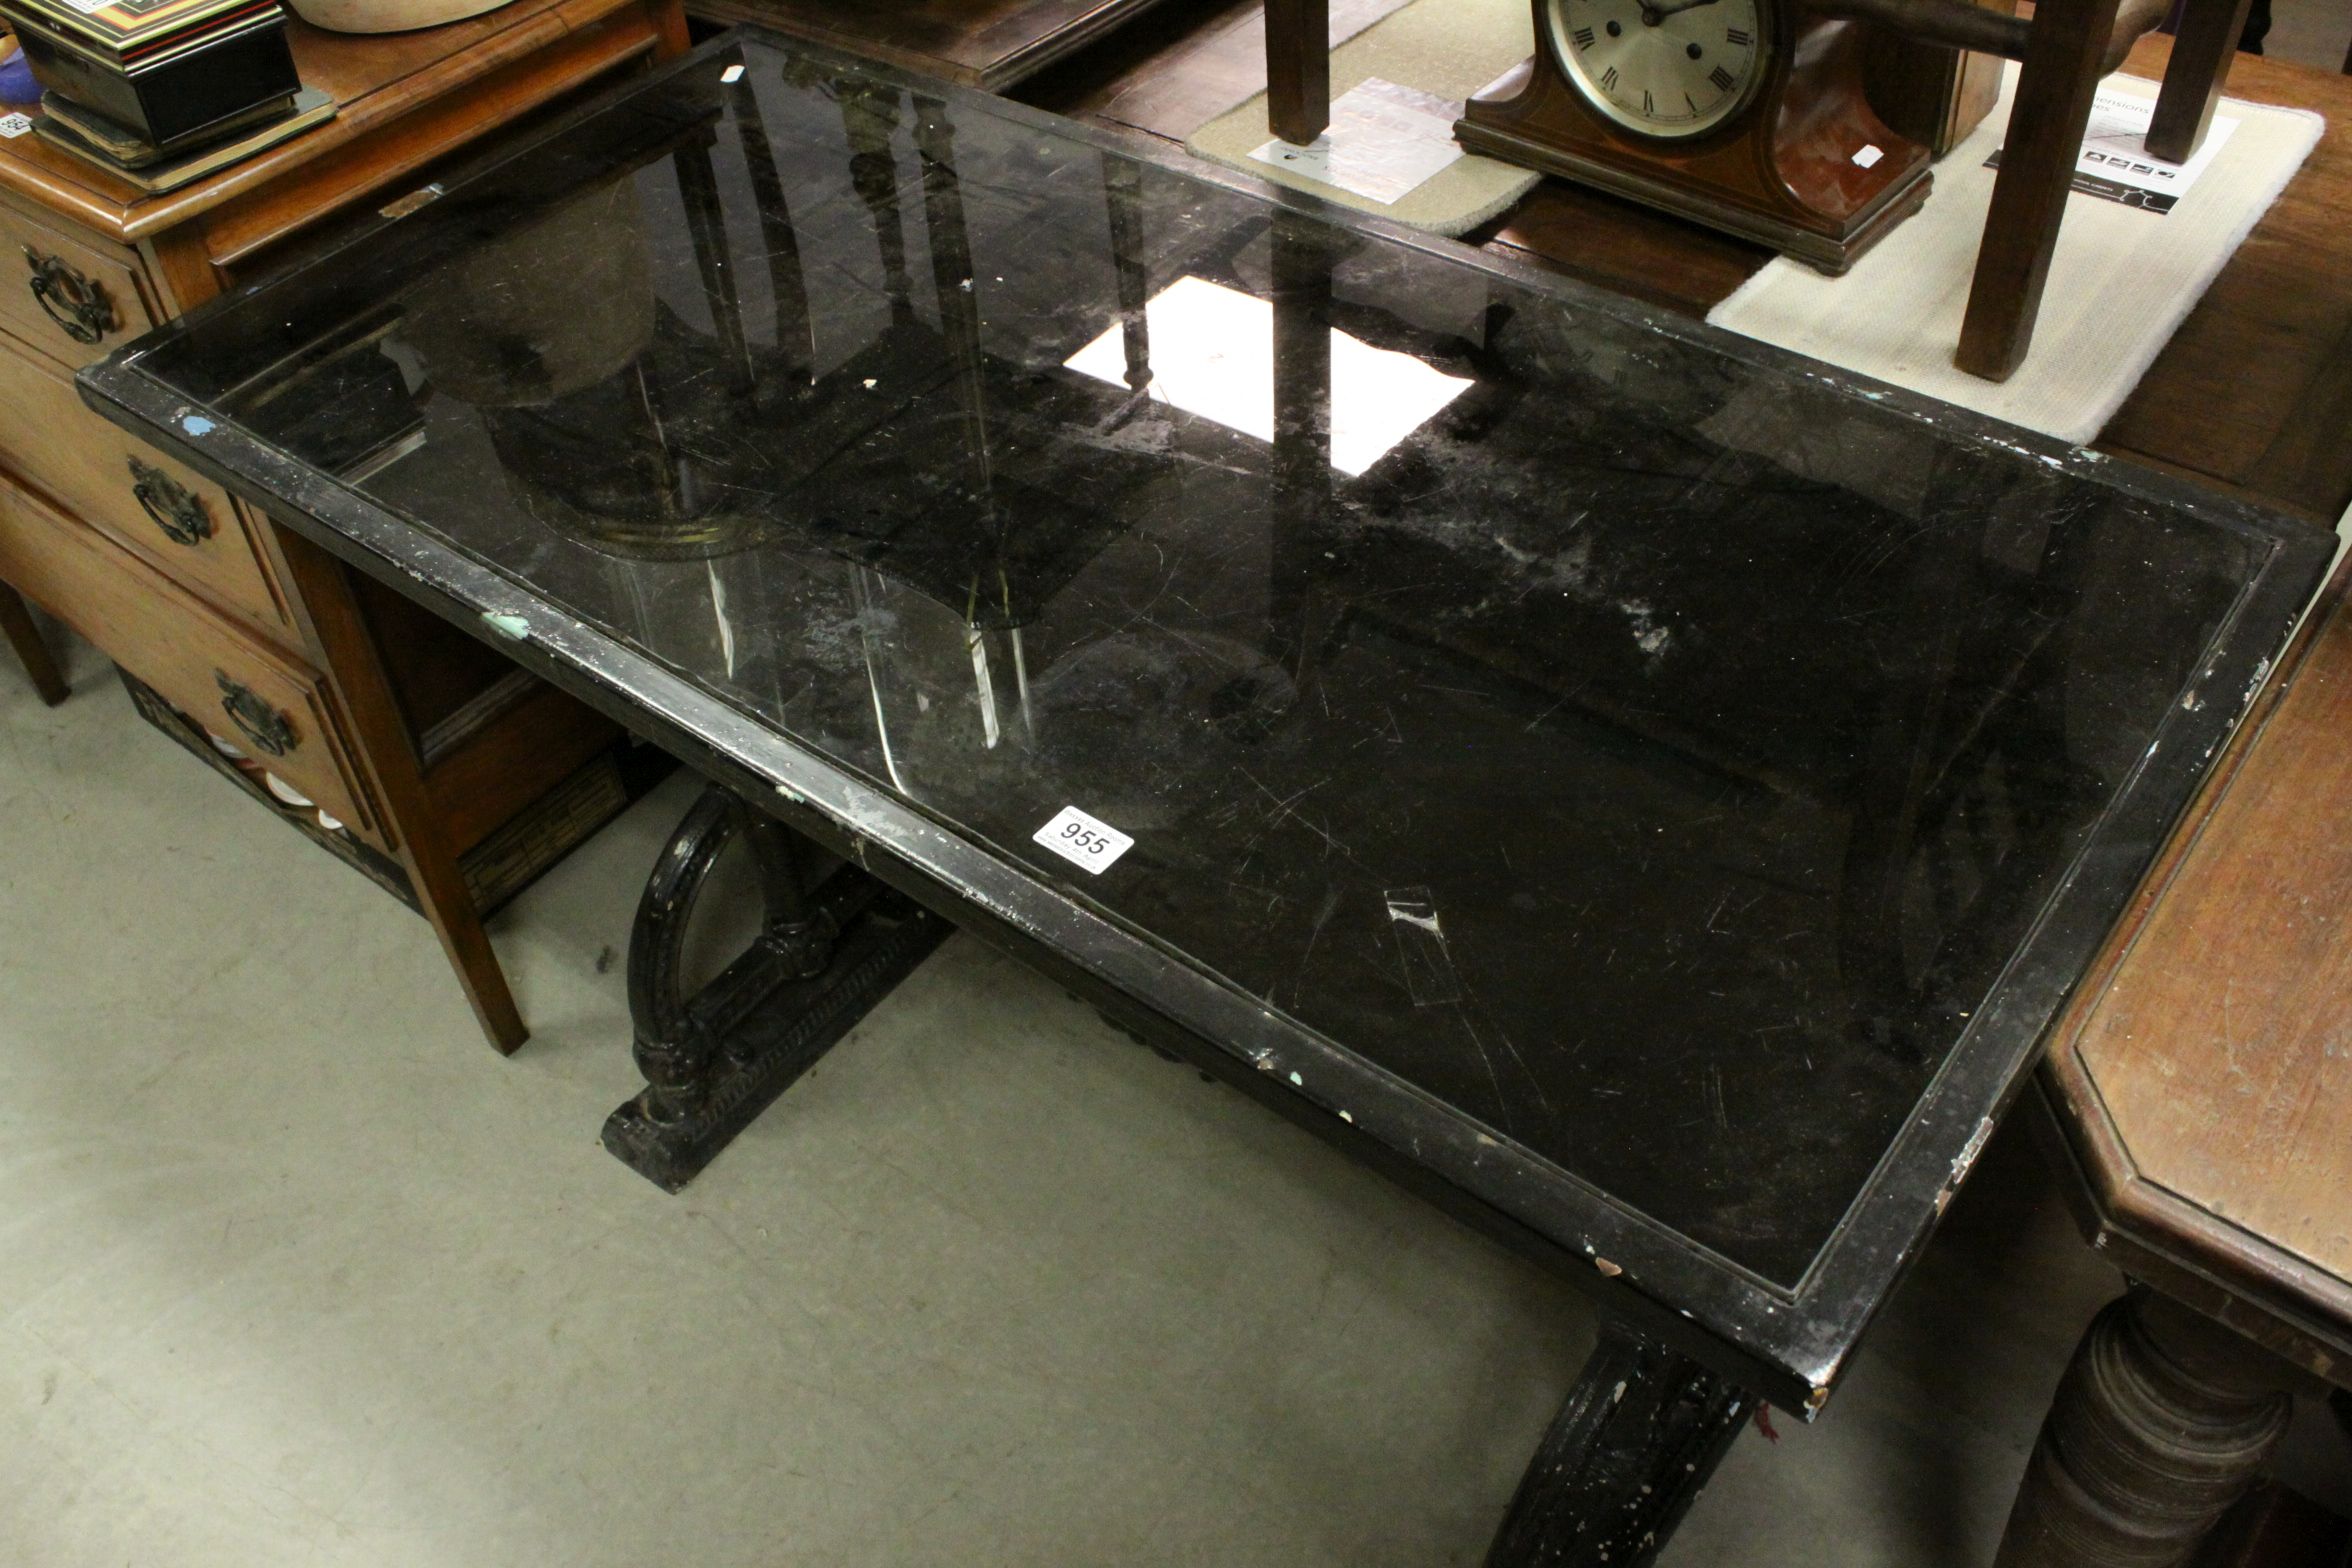 Coalbrookdale Style Garden / Pub Table with Black Glass Inset Top, 117cms x 58cms x 78cms high - Image 2 of 10